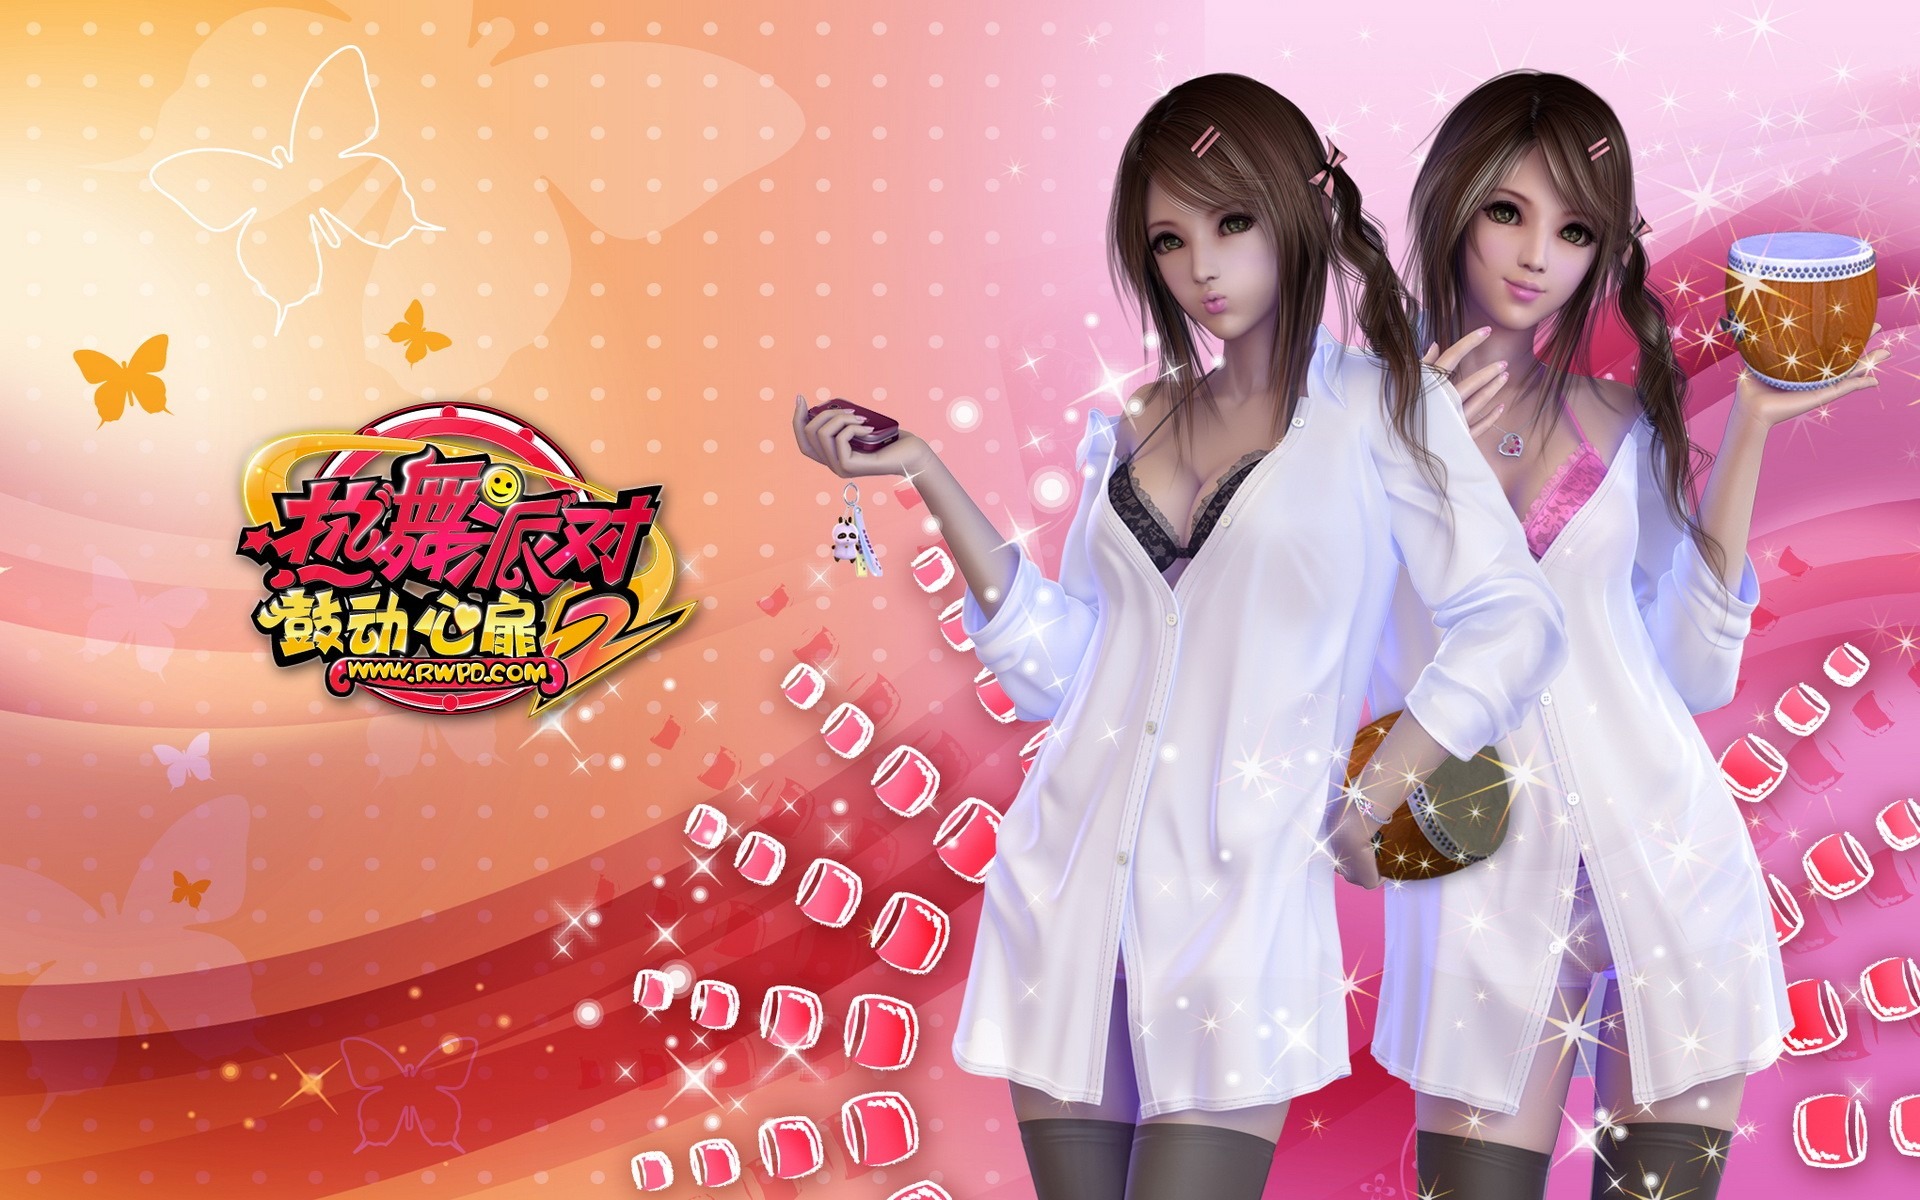 Online game Hot Dance Party II official wallpapers #12 - 1920x1200